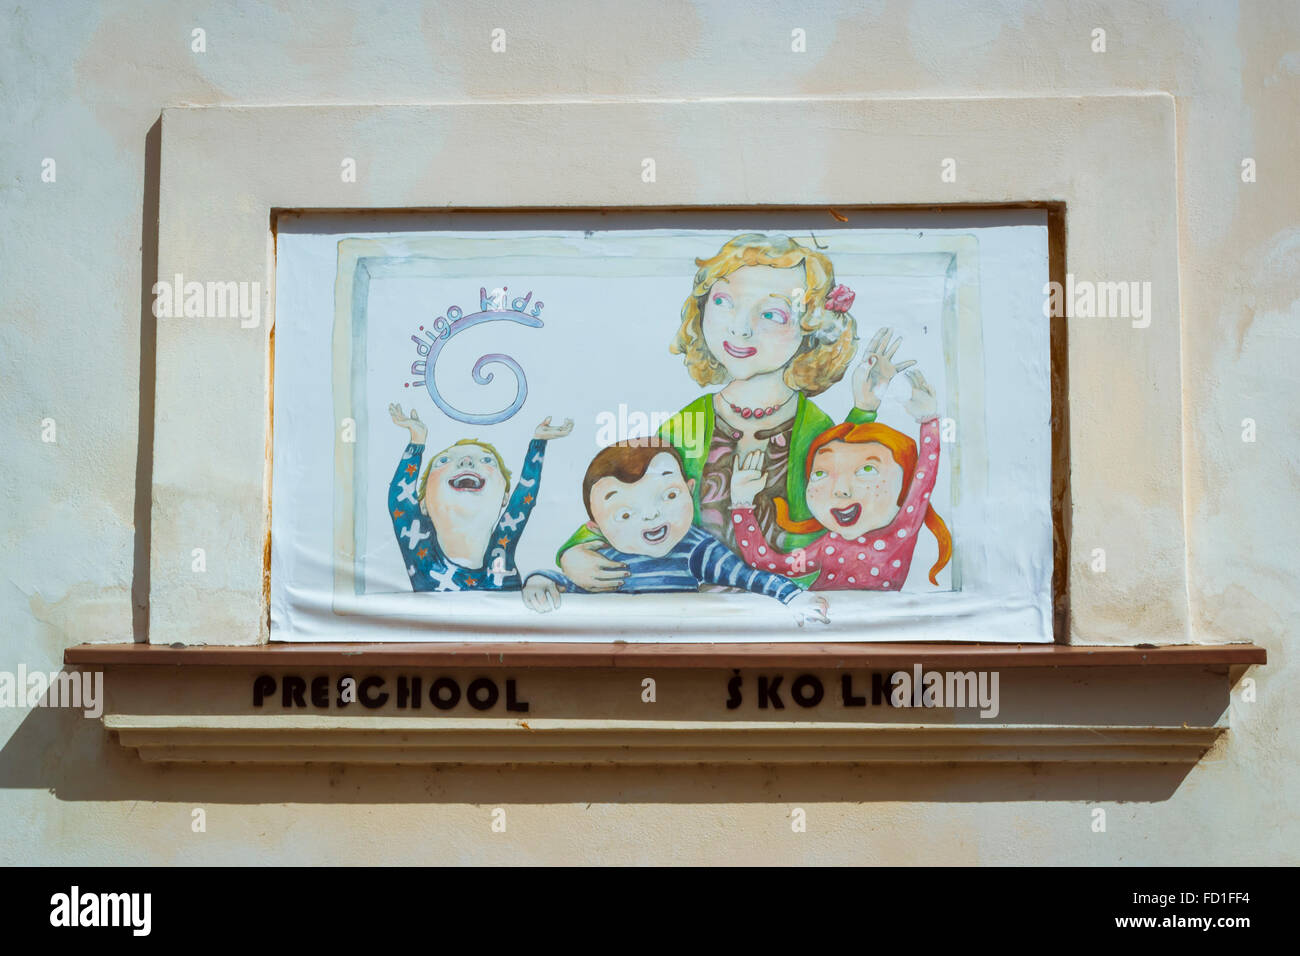 PRAGUE, CZECH REPUBLIC - AUGUST 28, 2015: Streetart: the woman with three children painted on the wall of the school. Vysehrad Stock Photo